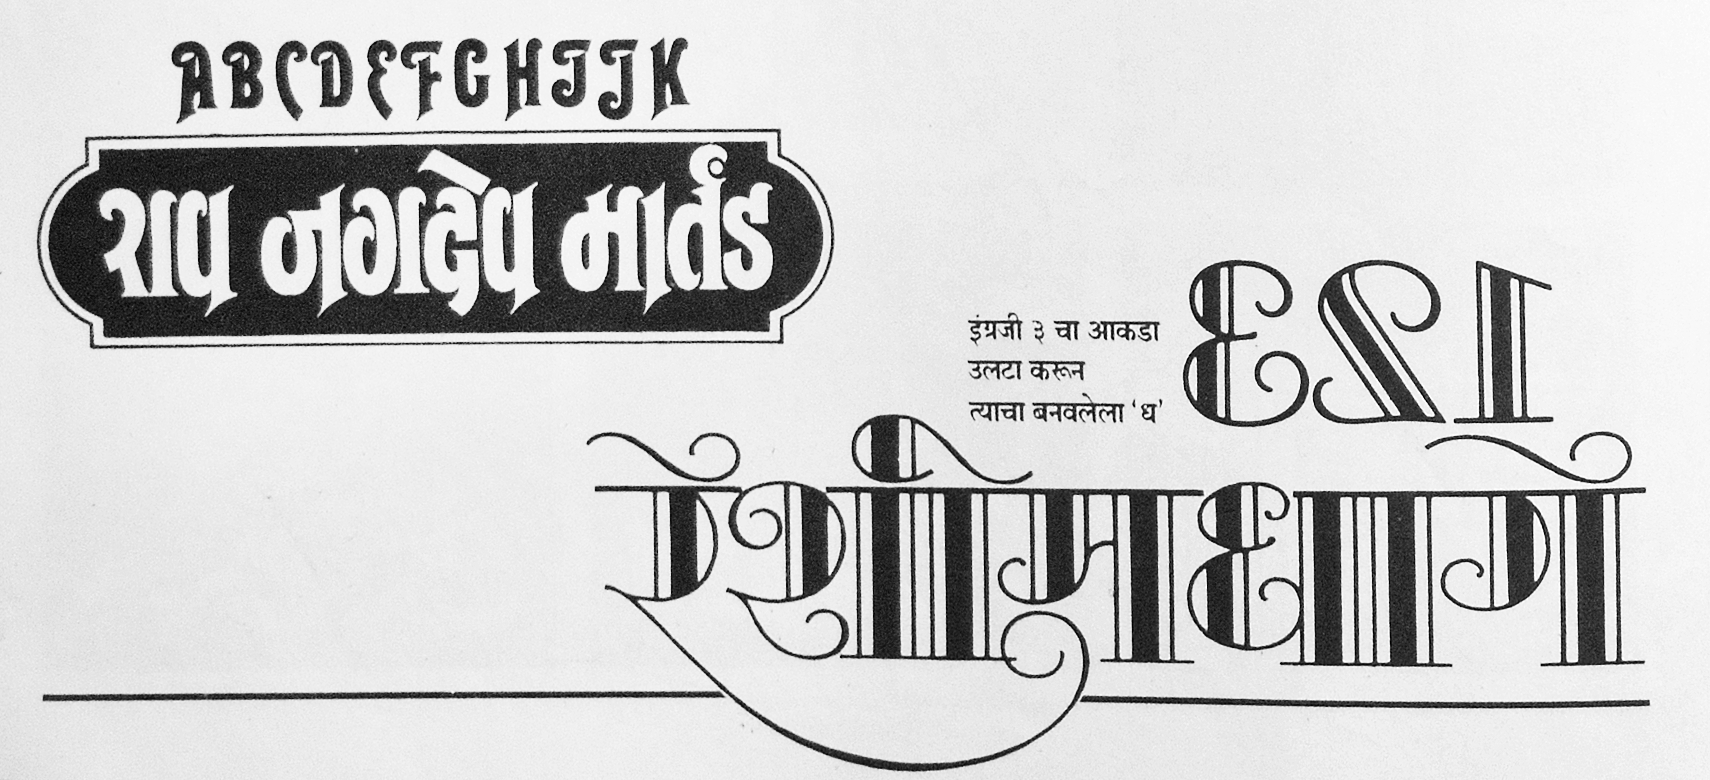 Comparisons of Shedge’s Marathi lettering and the original Latin-script letterforms he based them on. In the bottom-right design, he talks flipped the numeral 3 to draw the Devanagari ध visible directly below it.